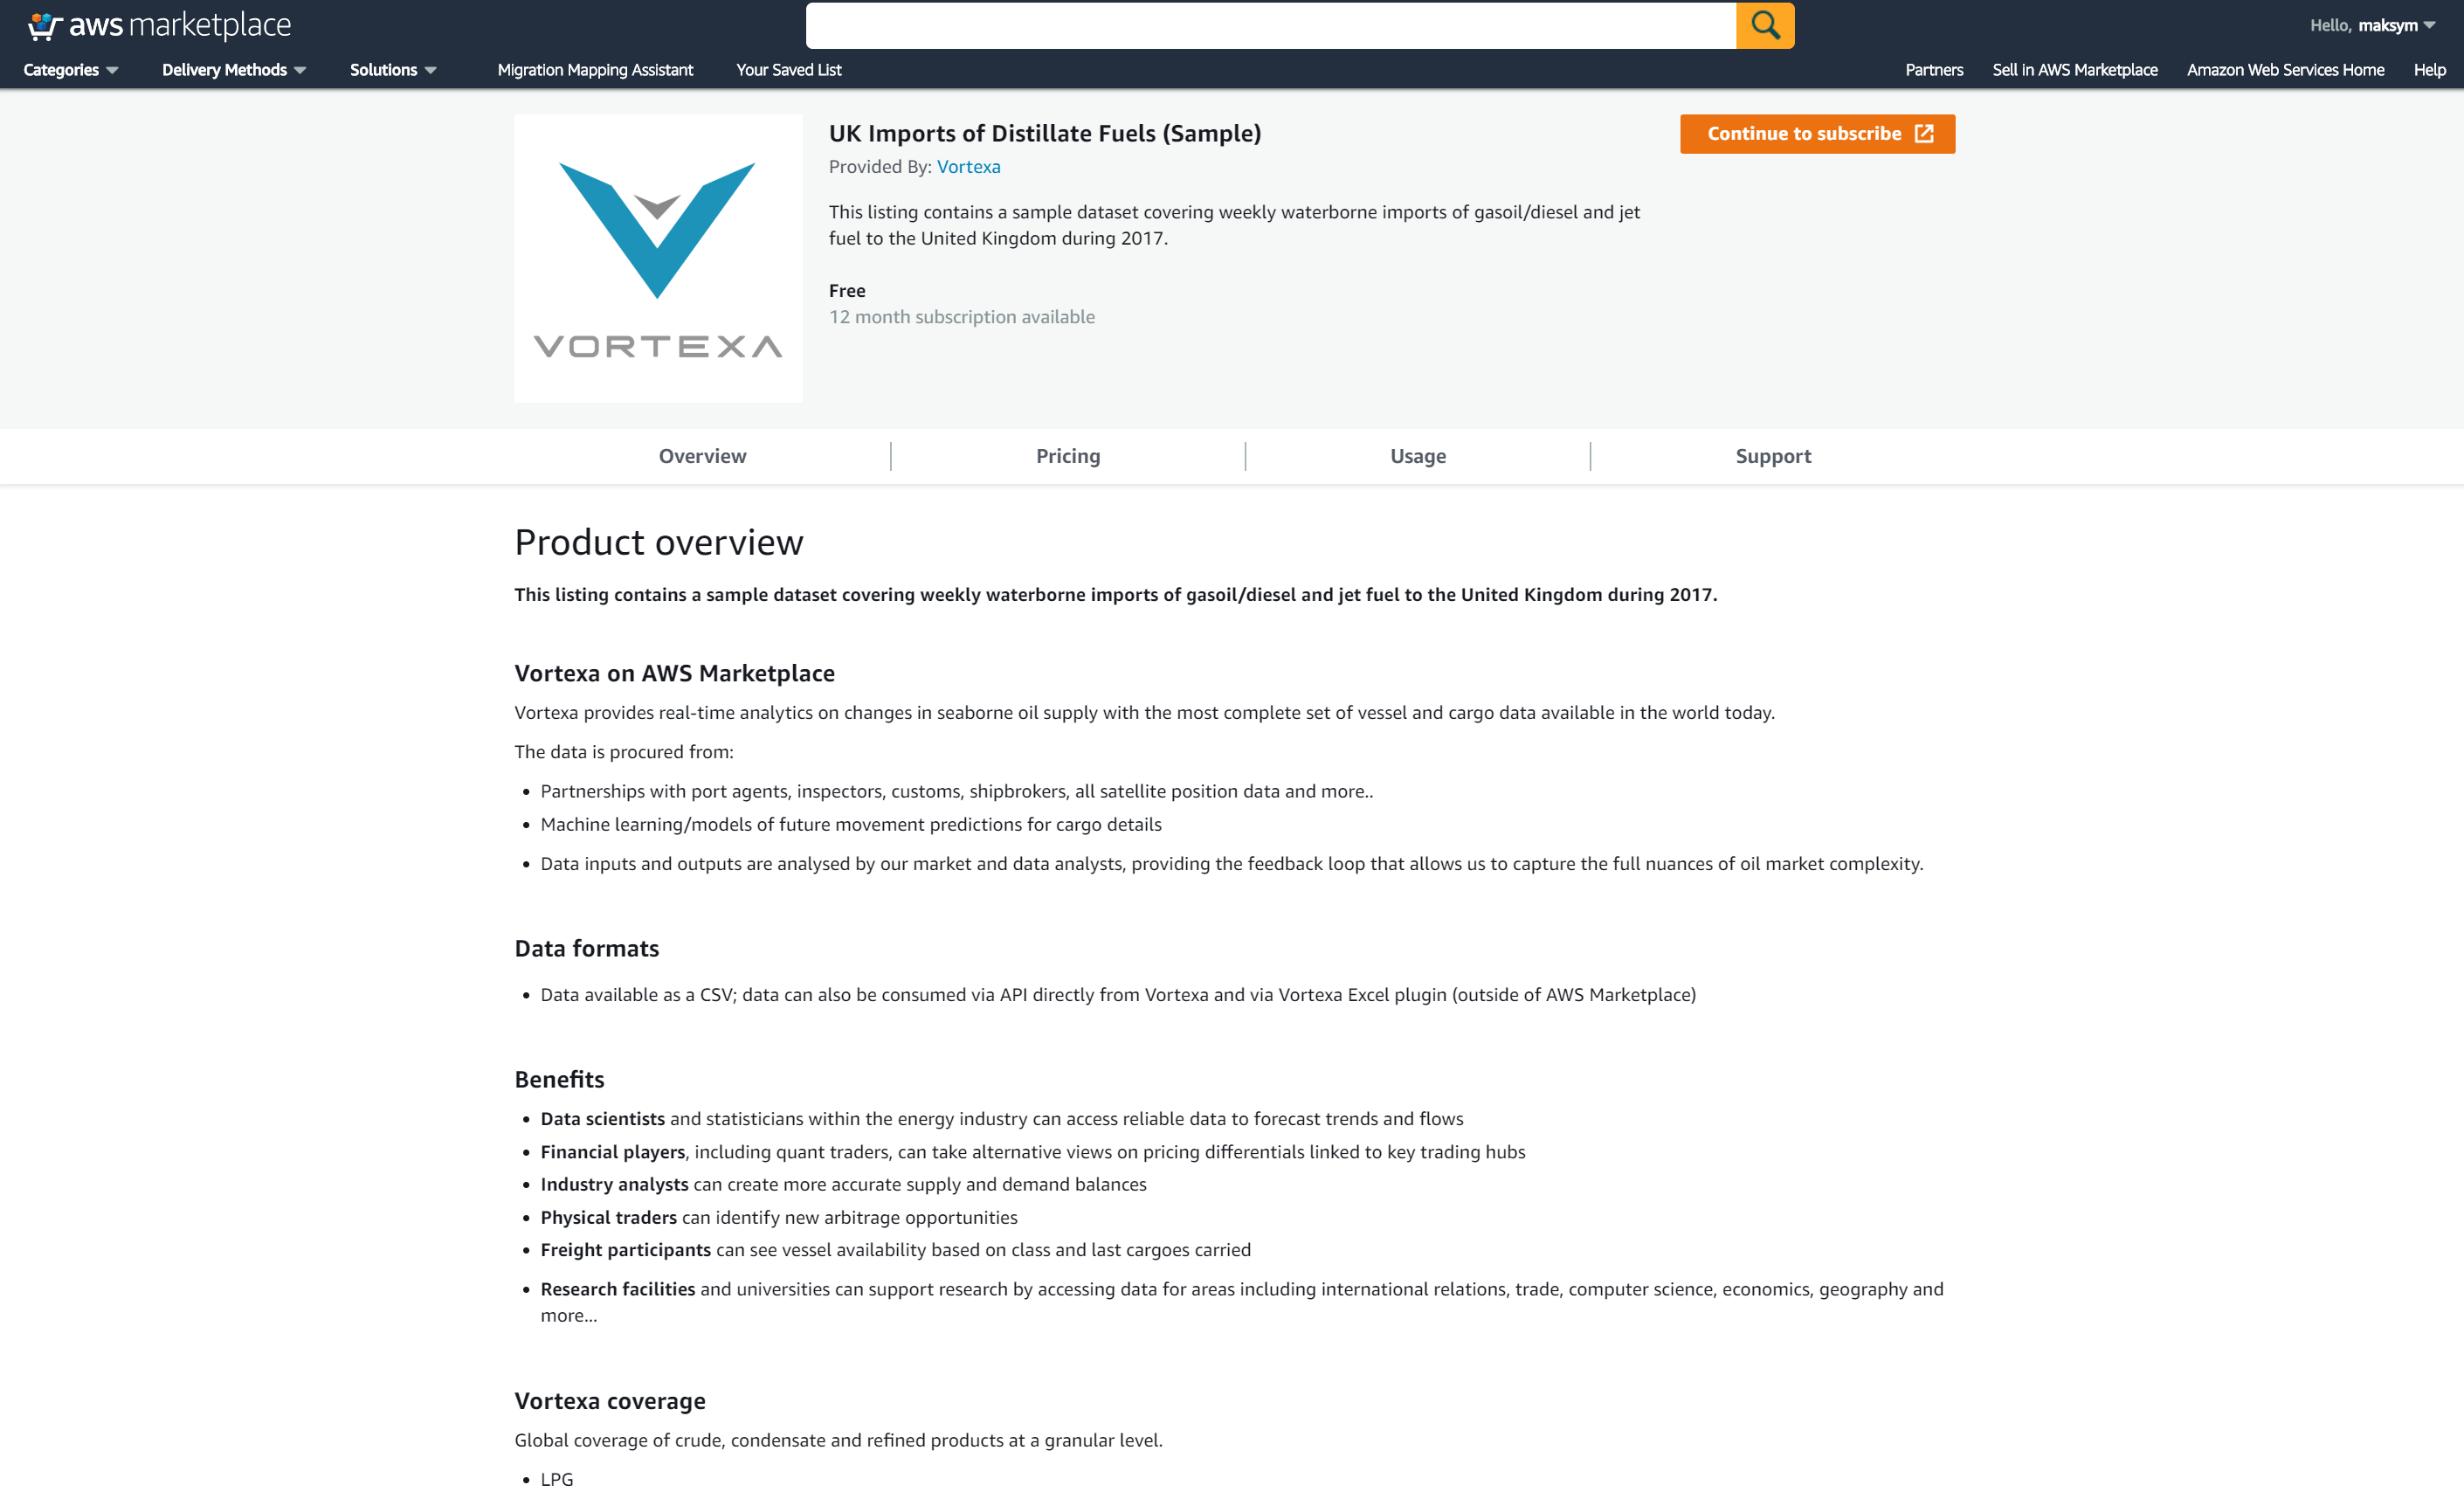 A sample of Vortexa products on the AWS Data Exchange